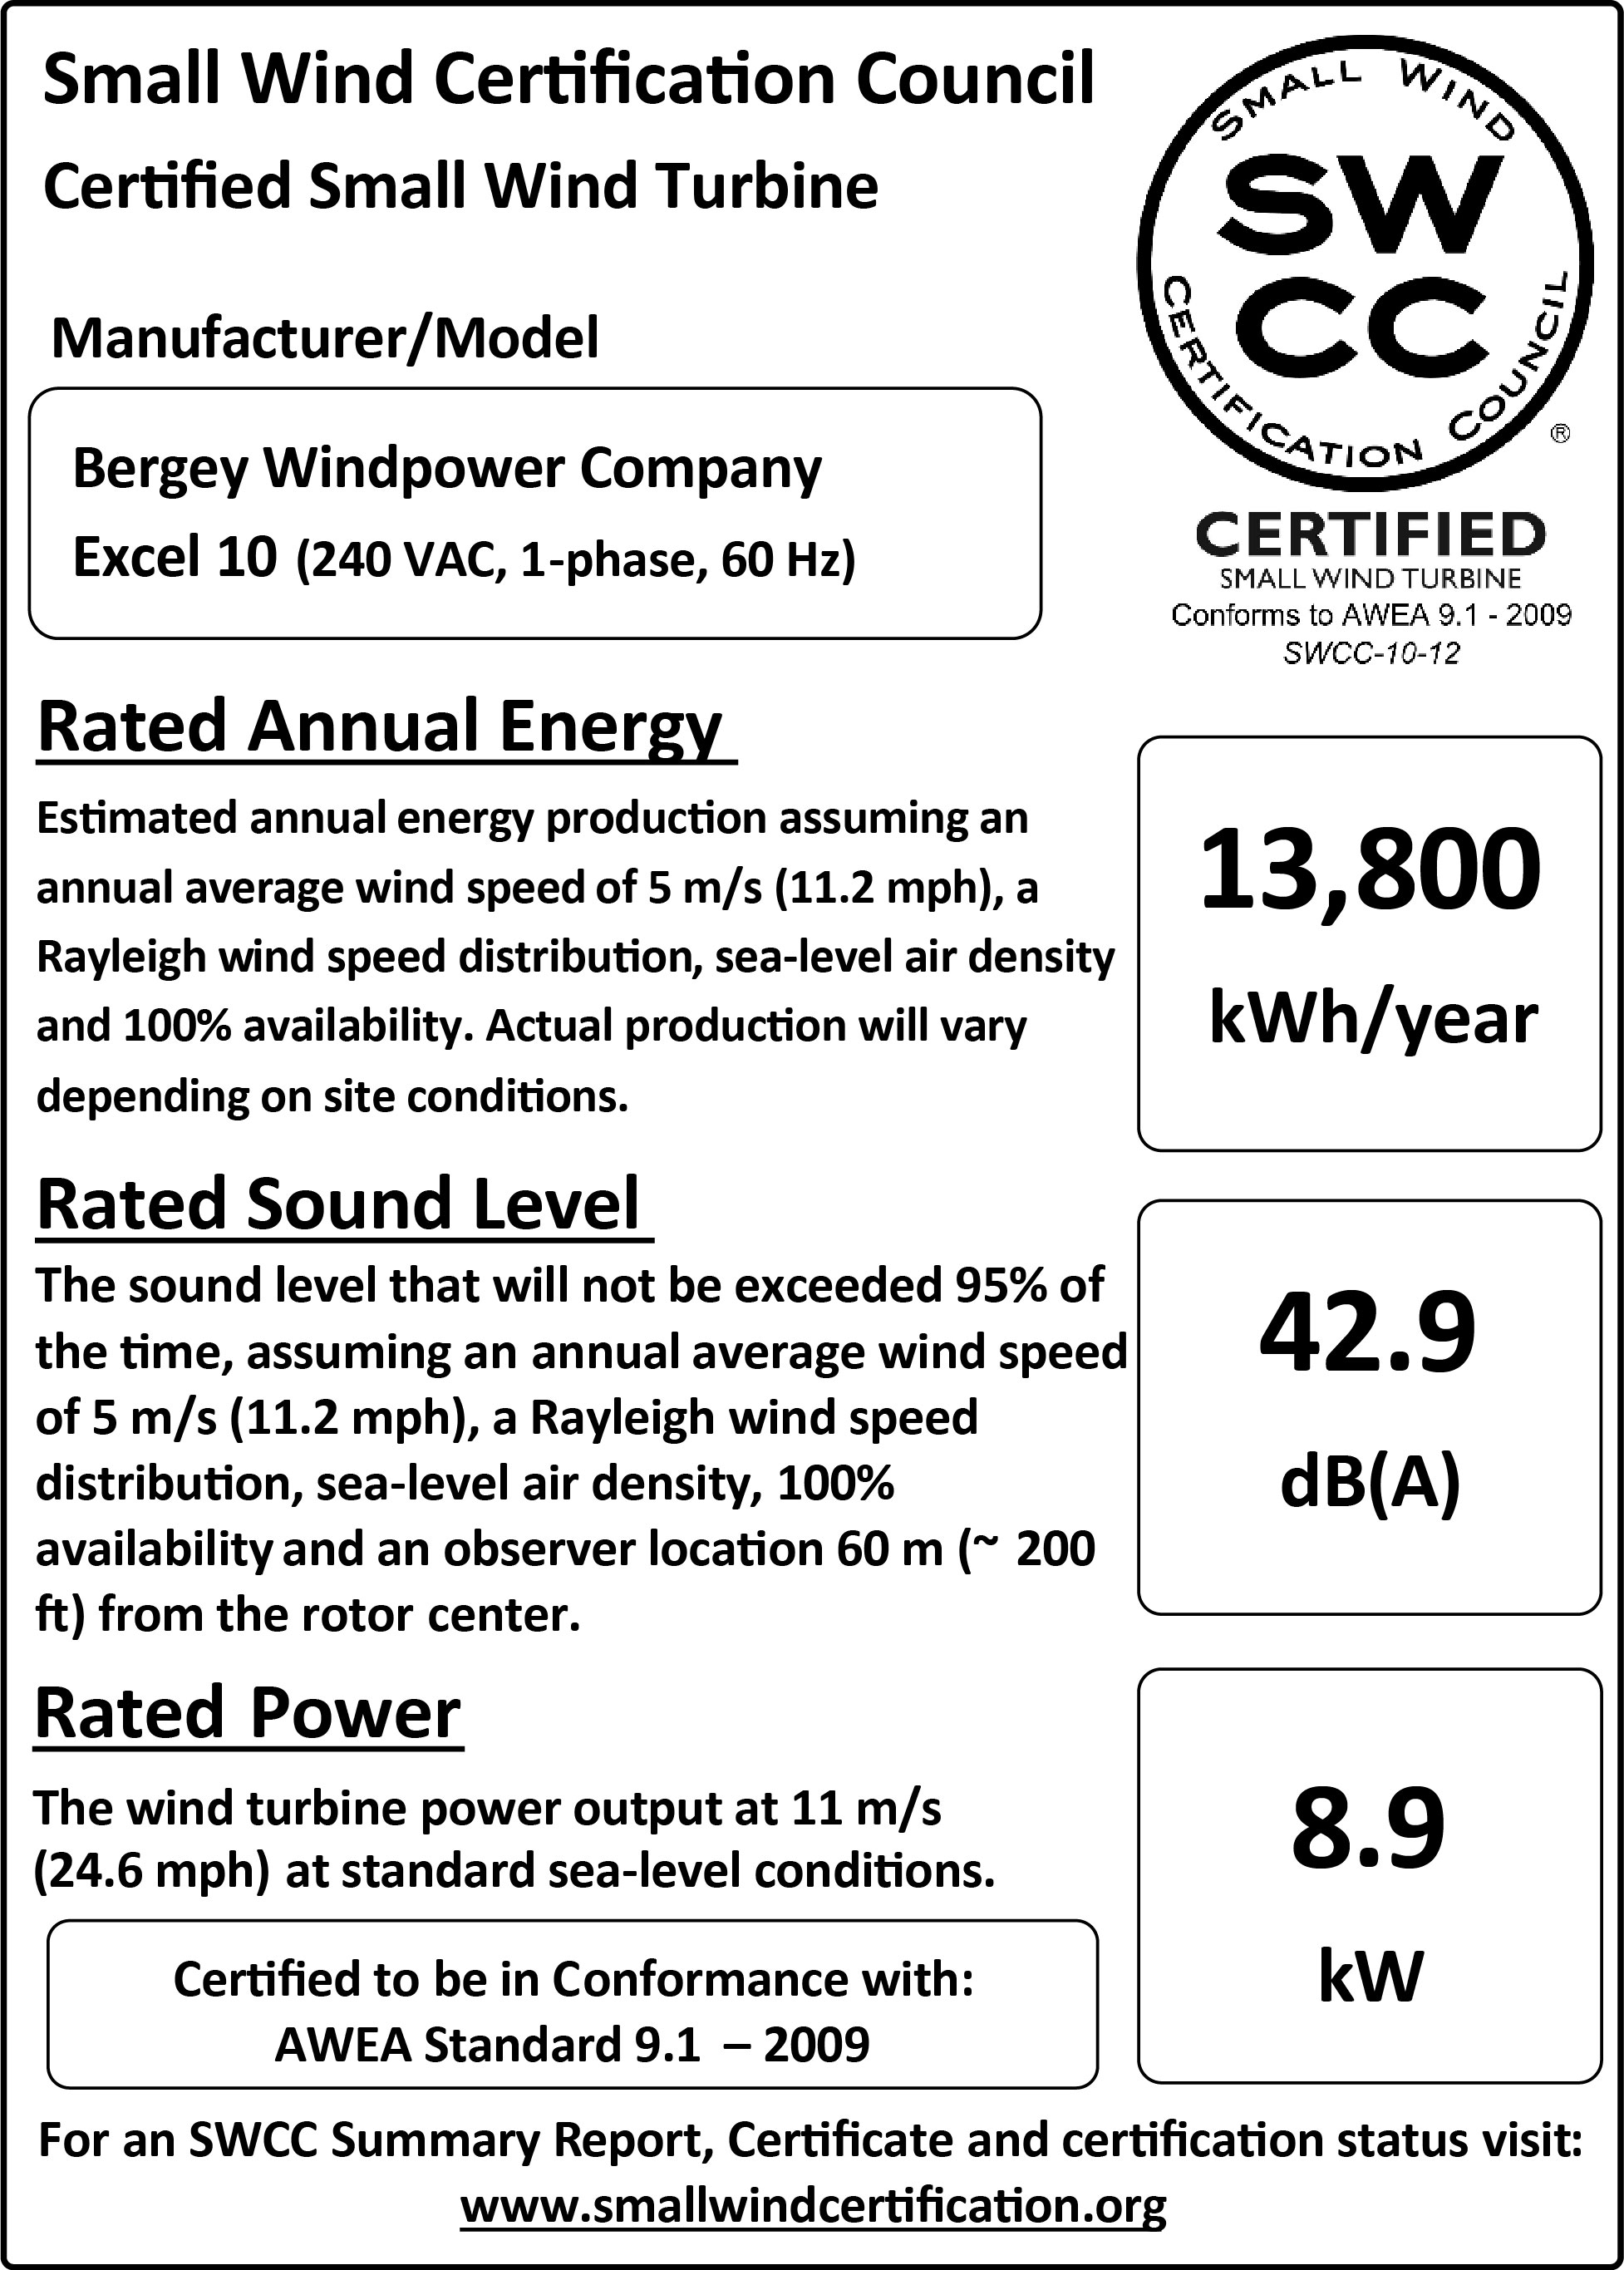 Small Wind Certification Council Certification Test Result Label